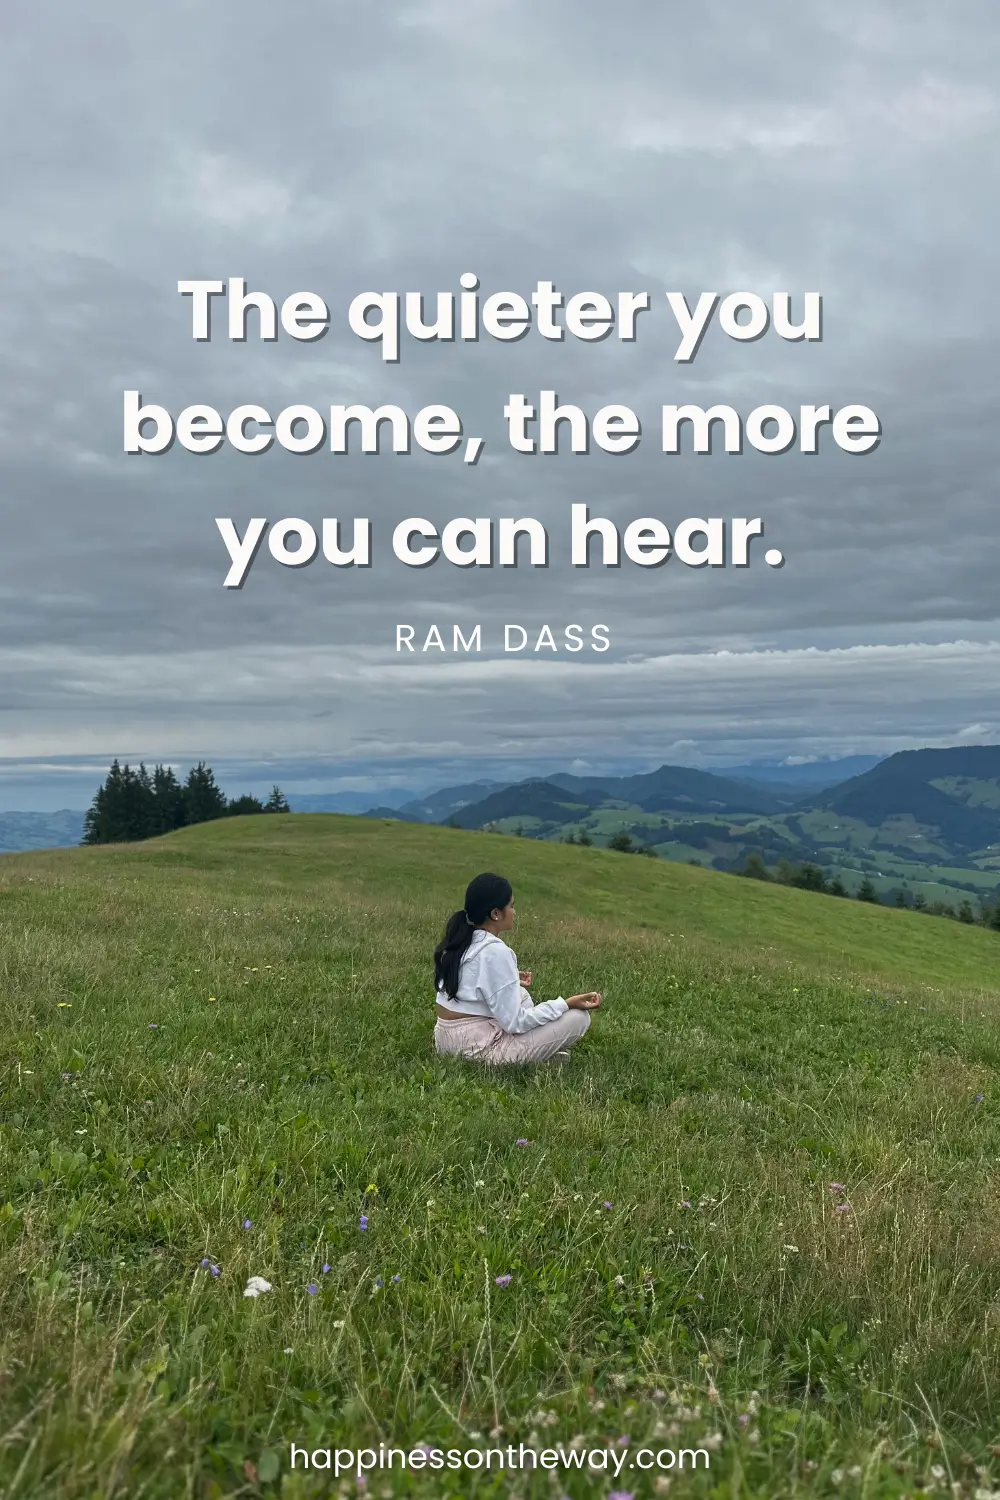 Me meditating in a serene grassy field with distant hills, paired with the quote 'The quieter you become, the more you can hear.' by Ram Dass